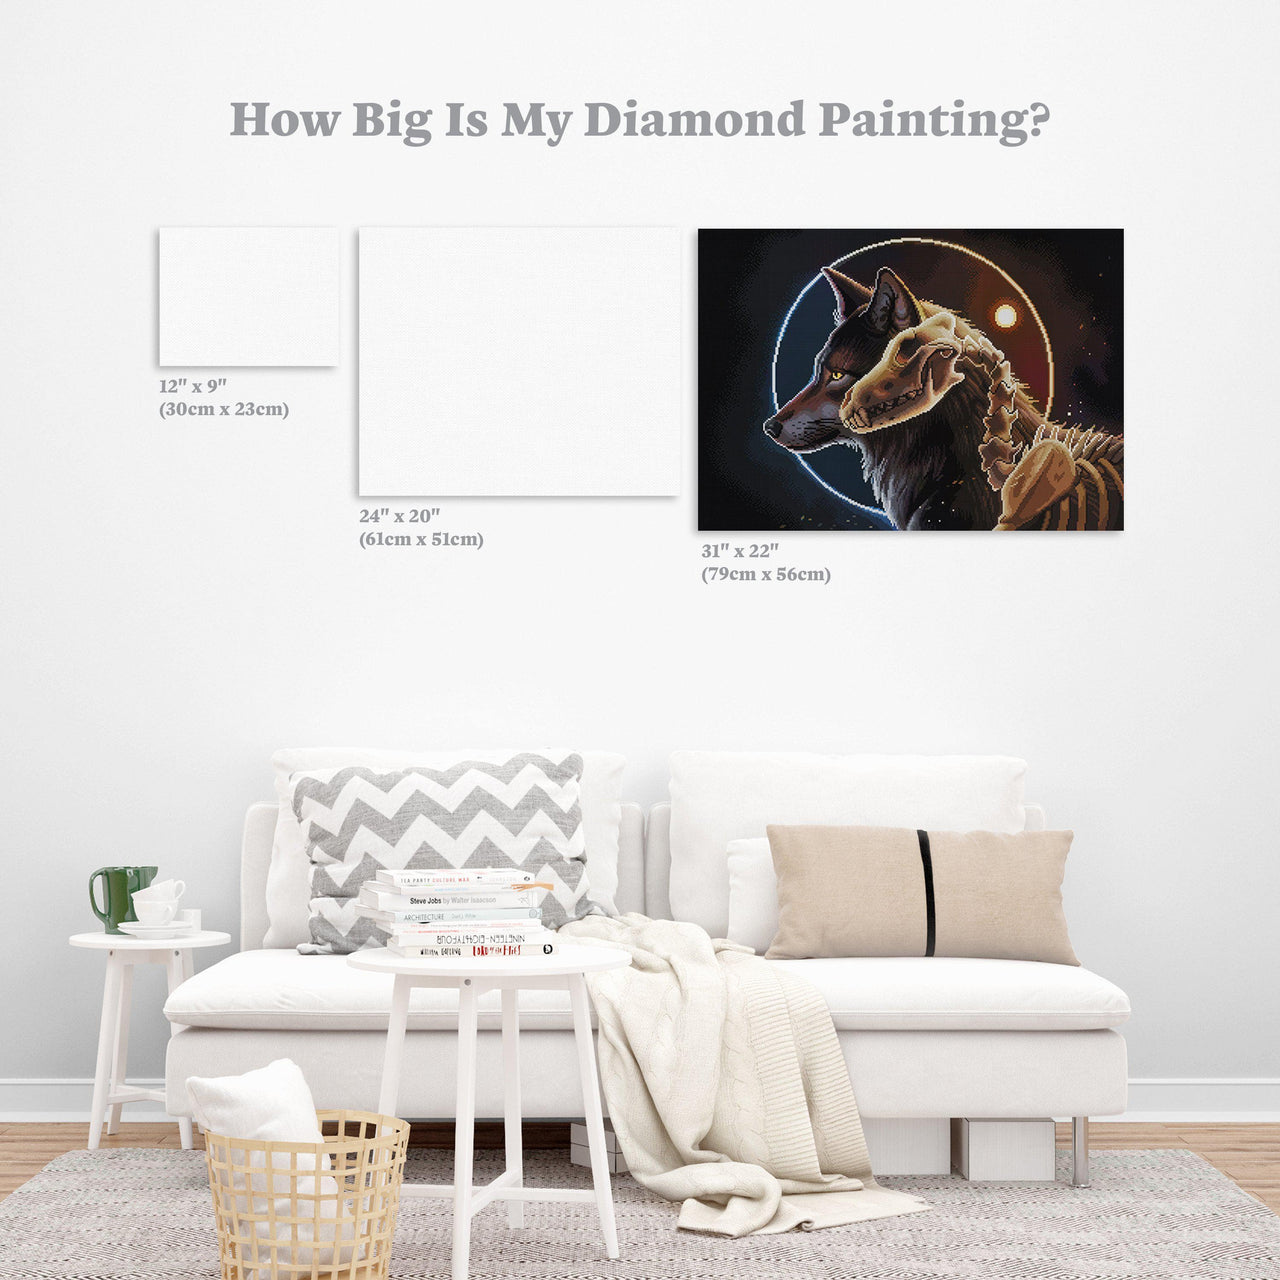 Diamond Painting I Am Light 31" x 22″ (79cm x 56cm) / Round with 36 Colors including 2 ABs